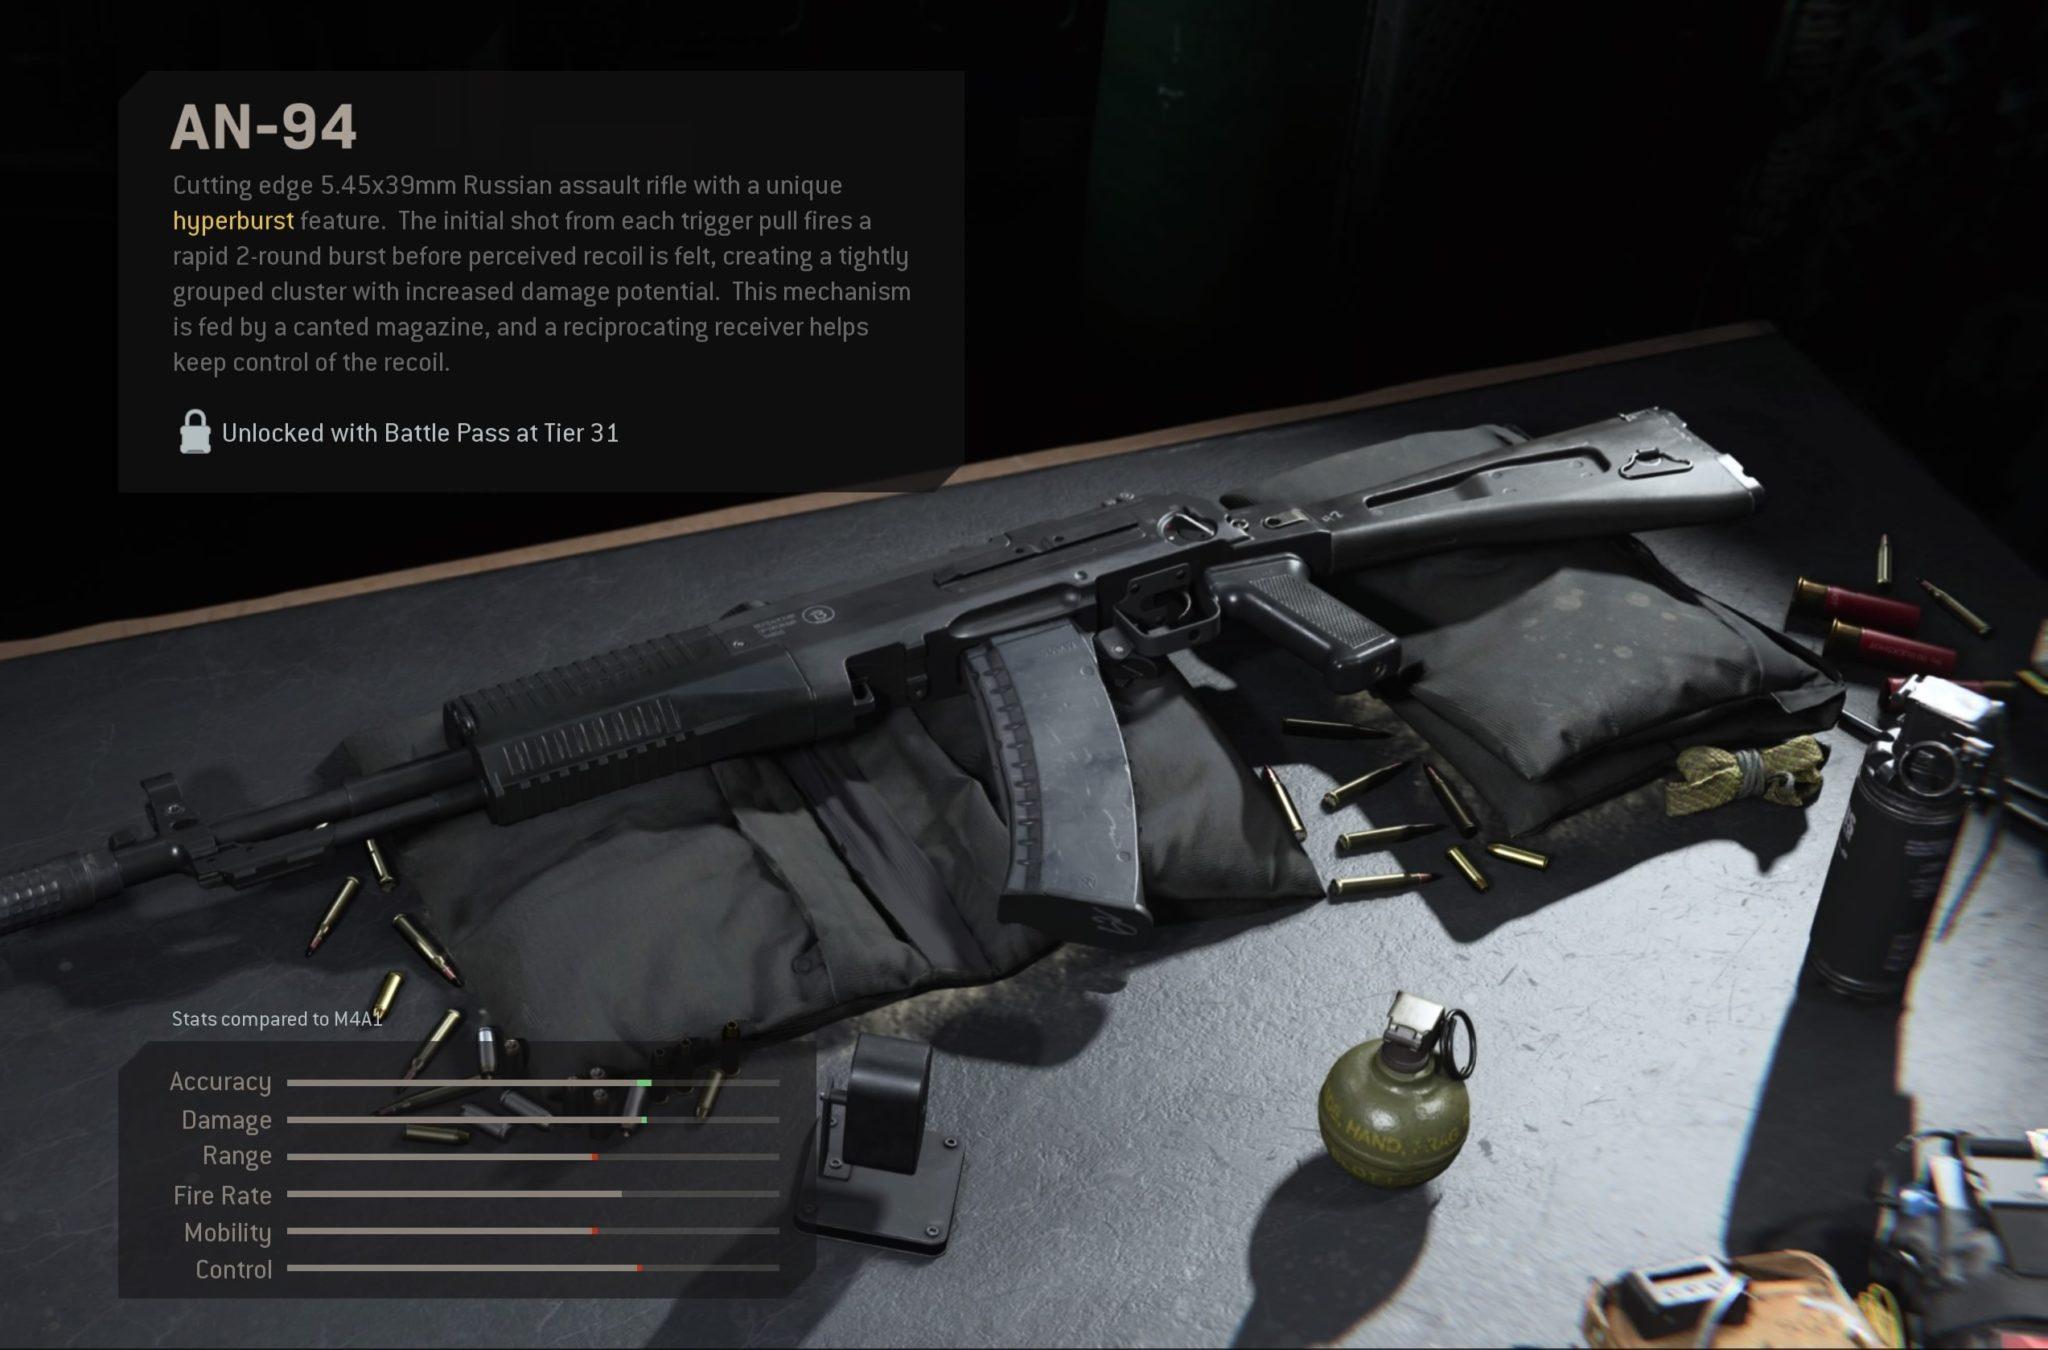 The AN-94 assault rifle as it appears in the Modern Wafare armory.